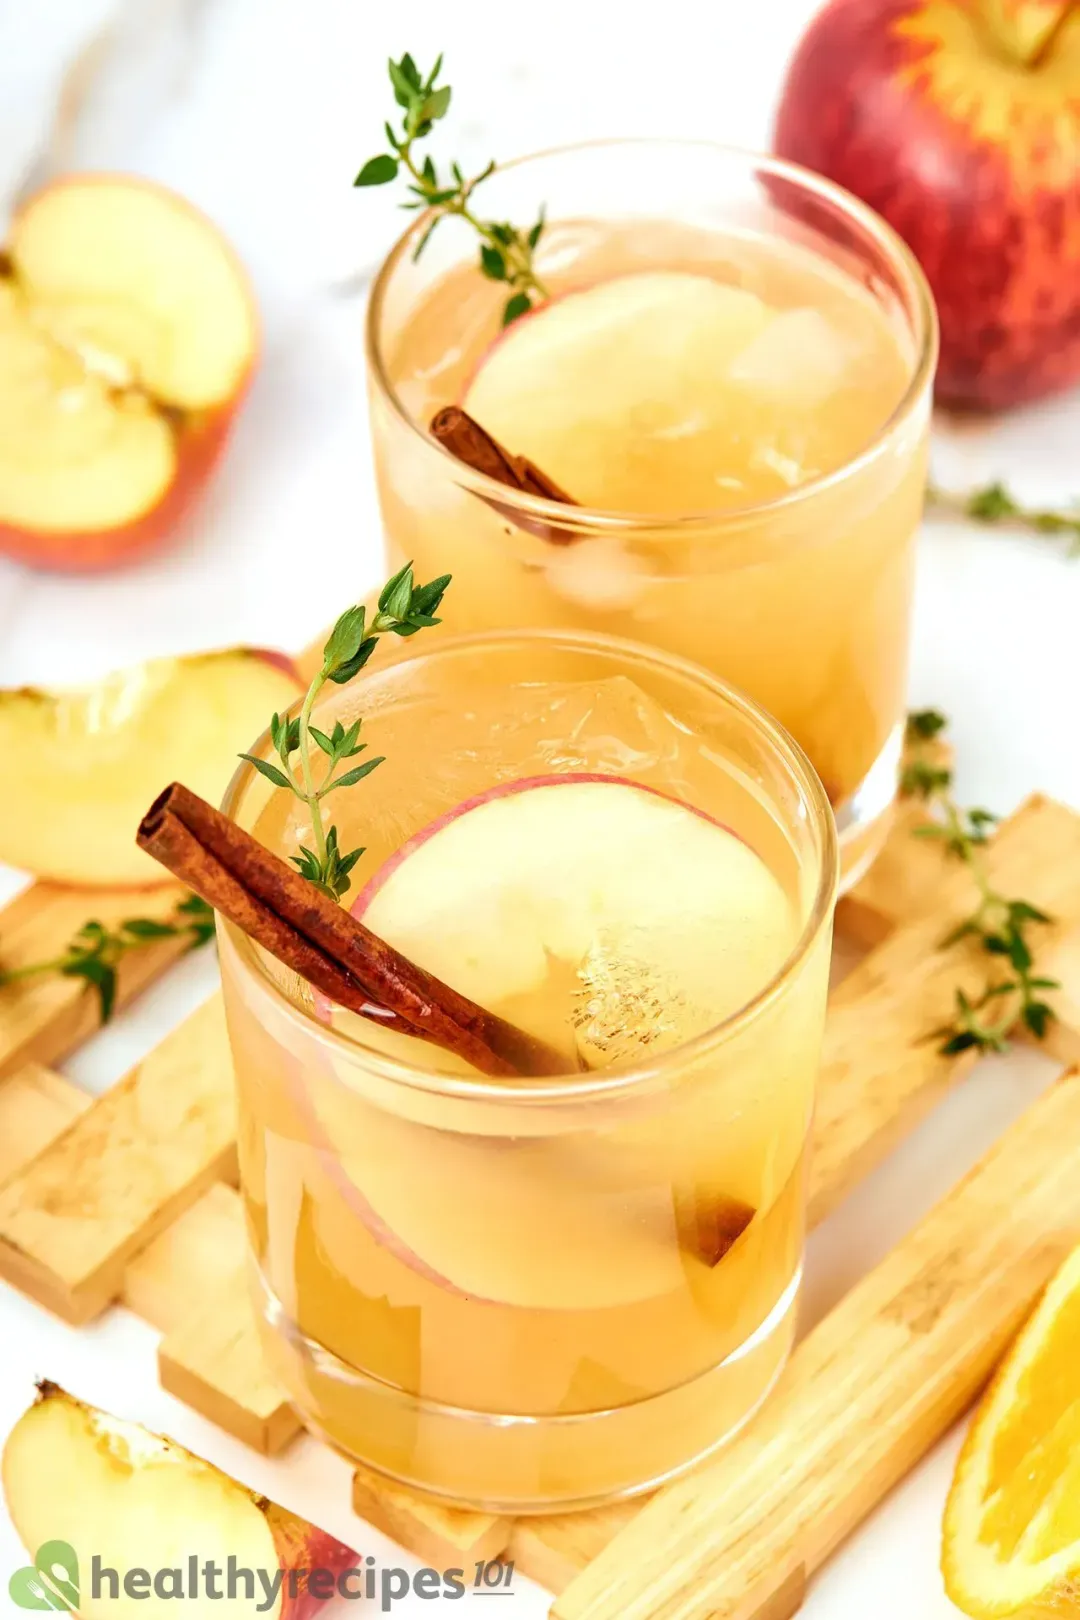 Two short glasses of apple cider cocktails and cinnamon sticks, apple slices, and rosemary, next to some apple wedges